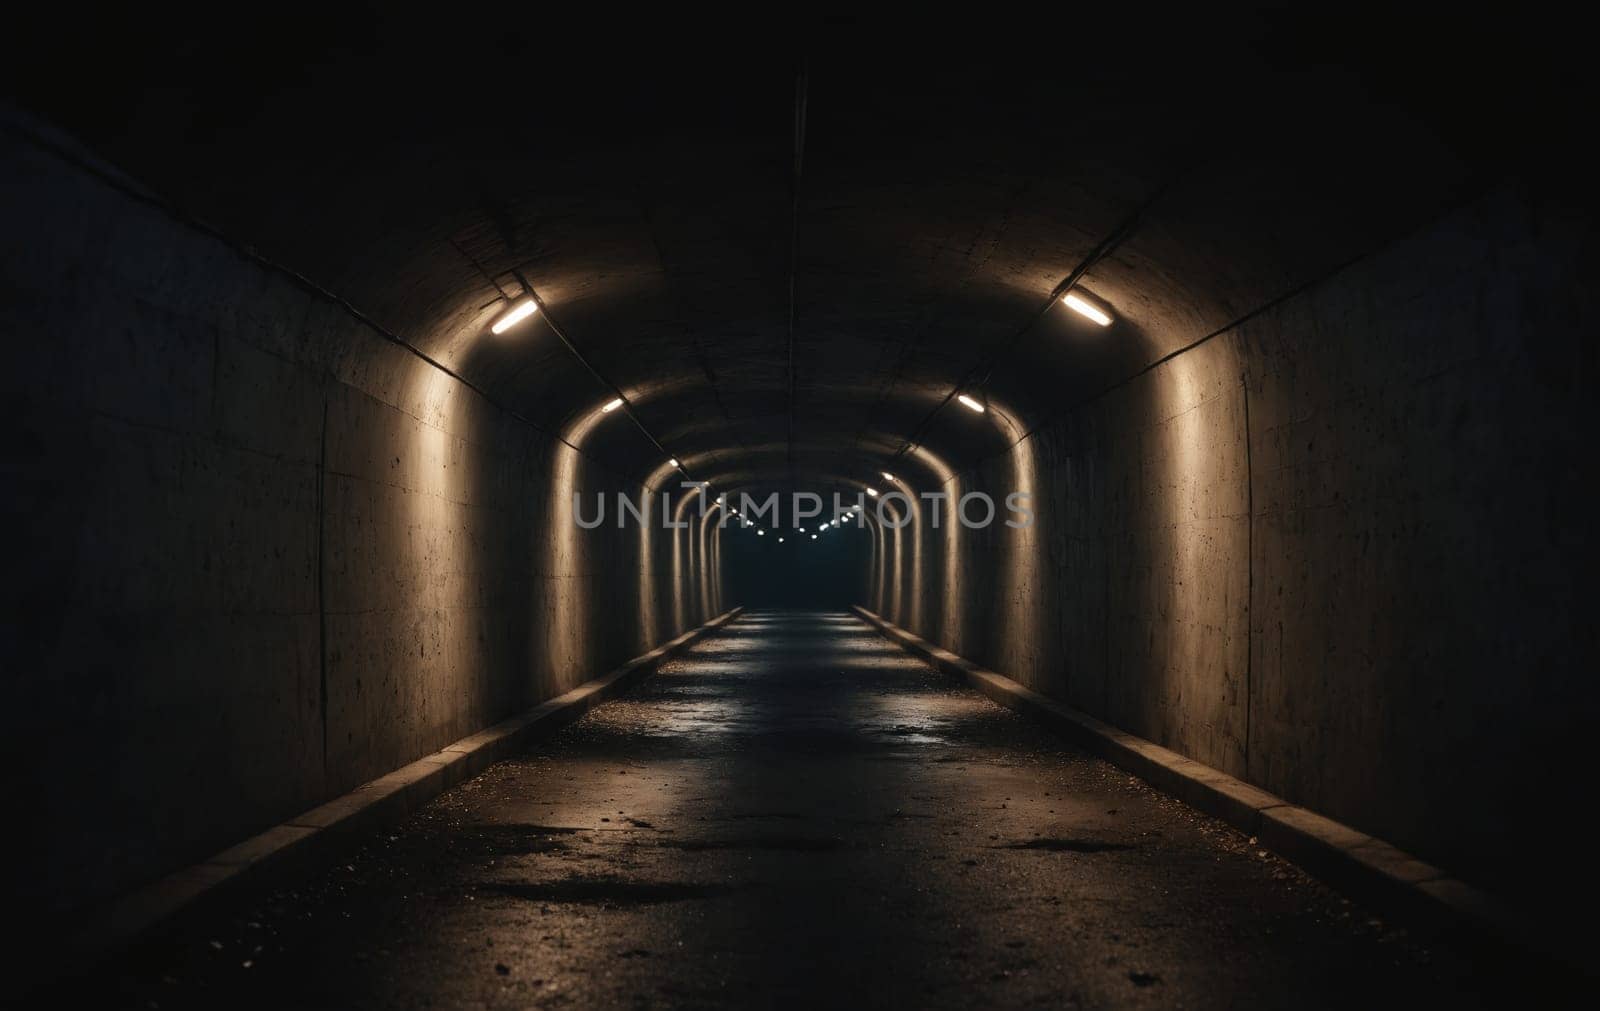 This captivating image portrays a tunnel vision, intensified by overexposed lights along the path, painted on slightly wet asphalt, crafting a visually stunning scene.